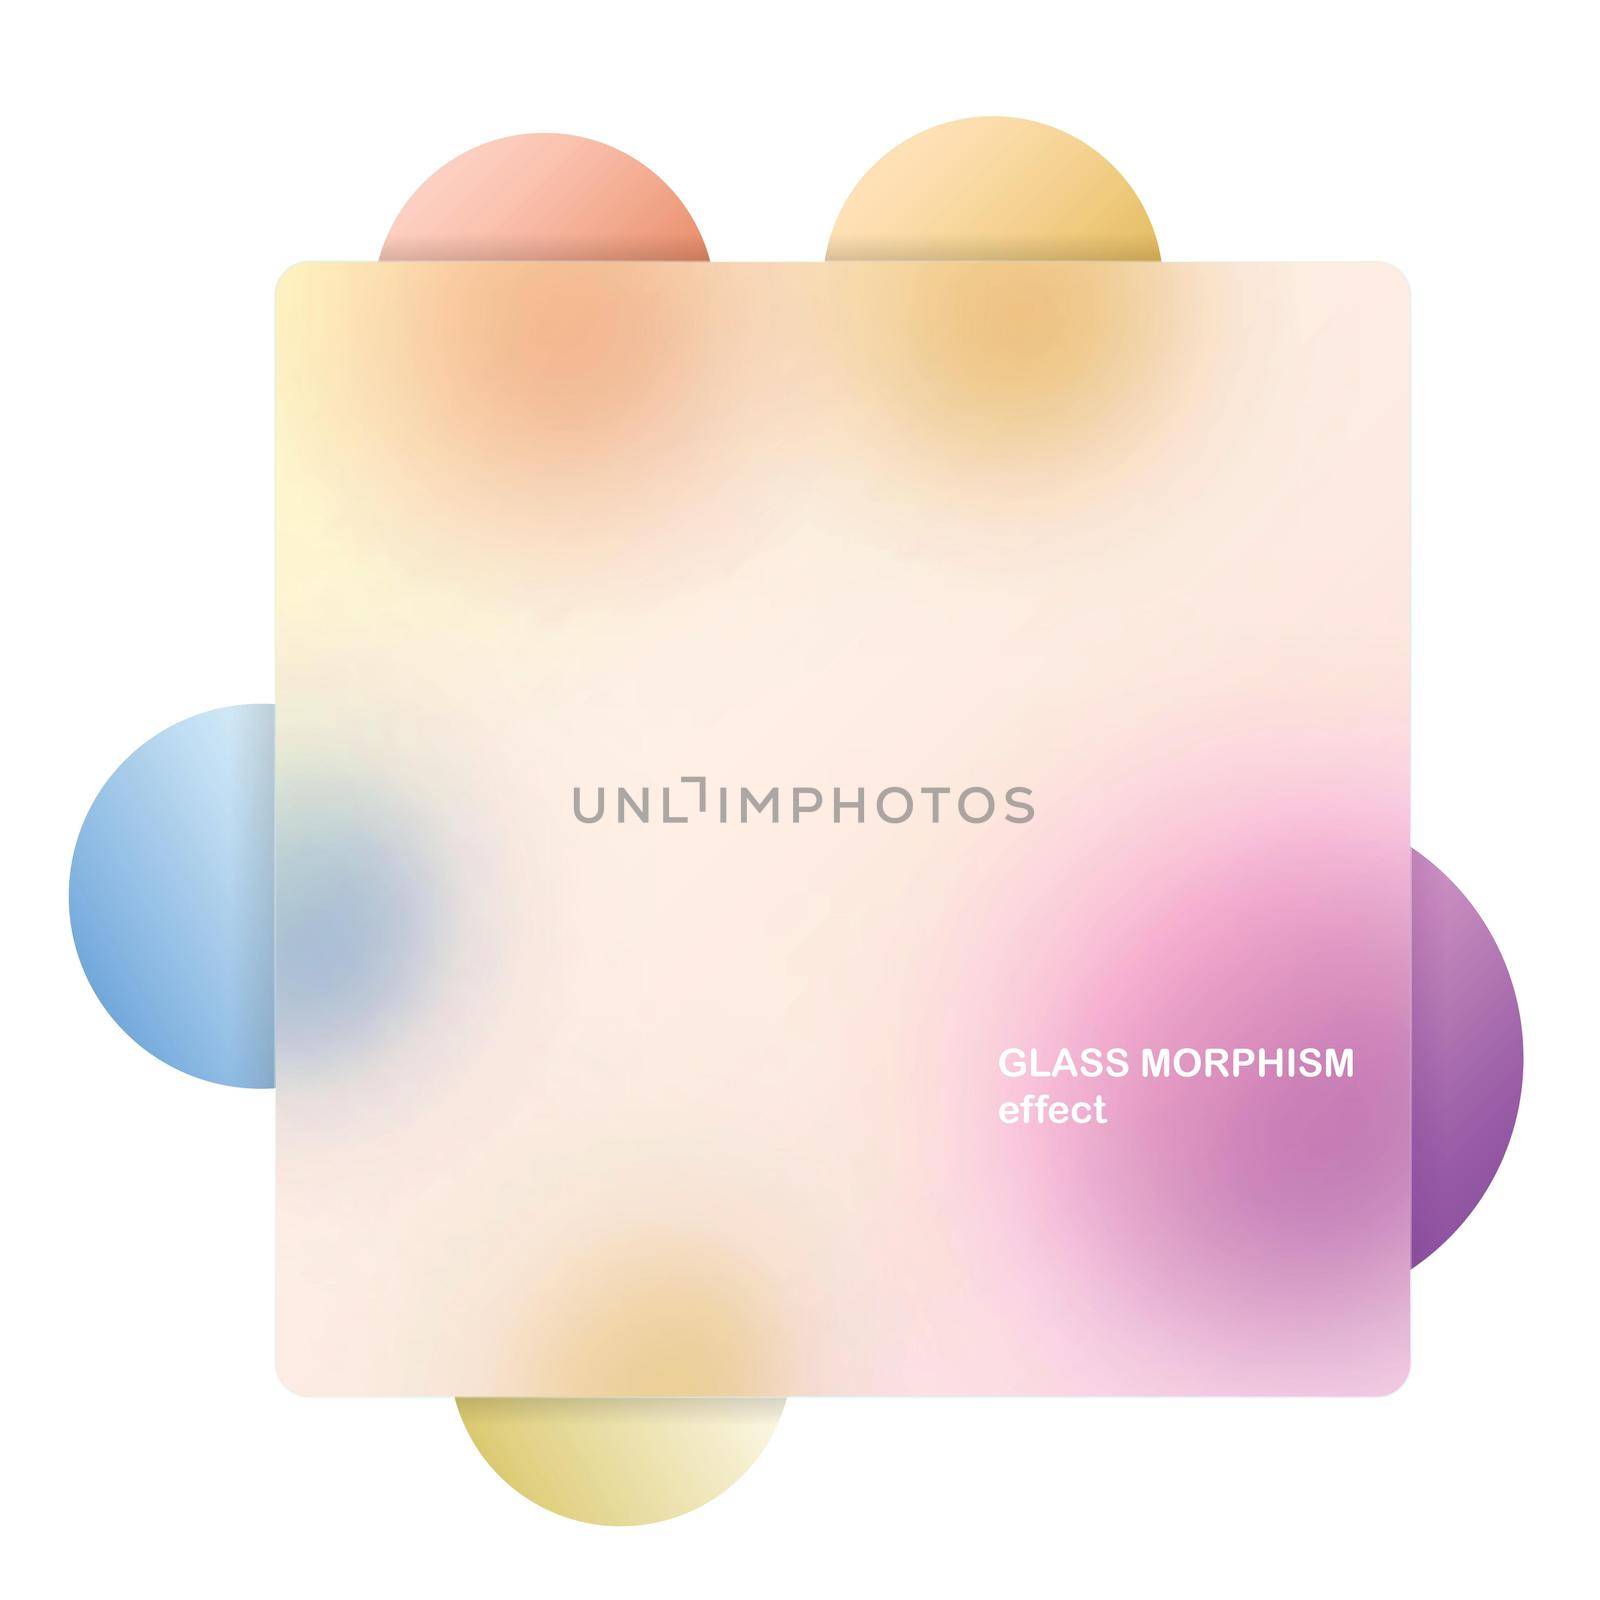 Modern background with glass morphism vector effect. Transparent glass card design. Glassmorphism trend style. Abstract banner with colored, white circles with blur and shadows. Vector illustration.